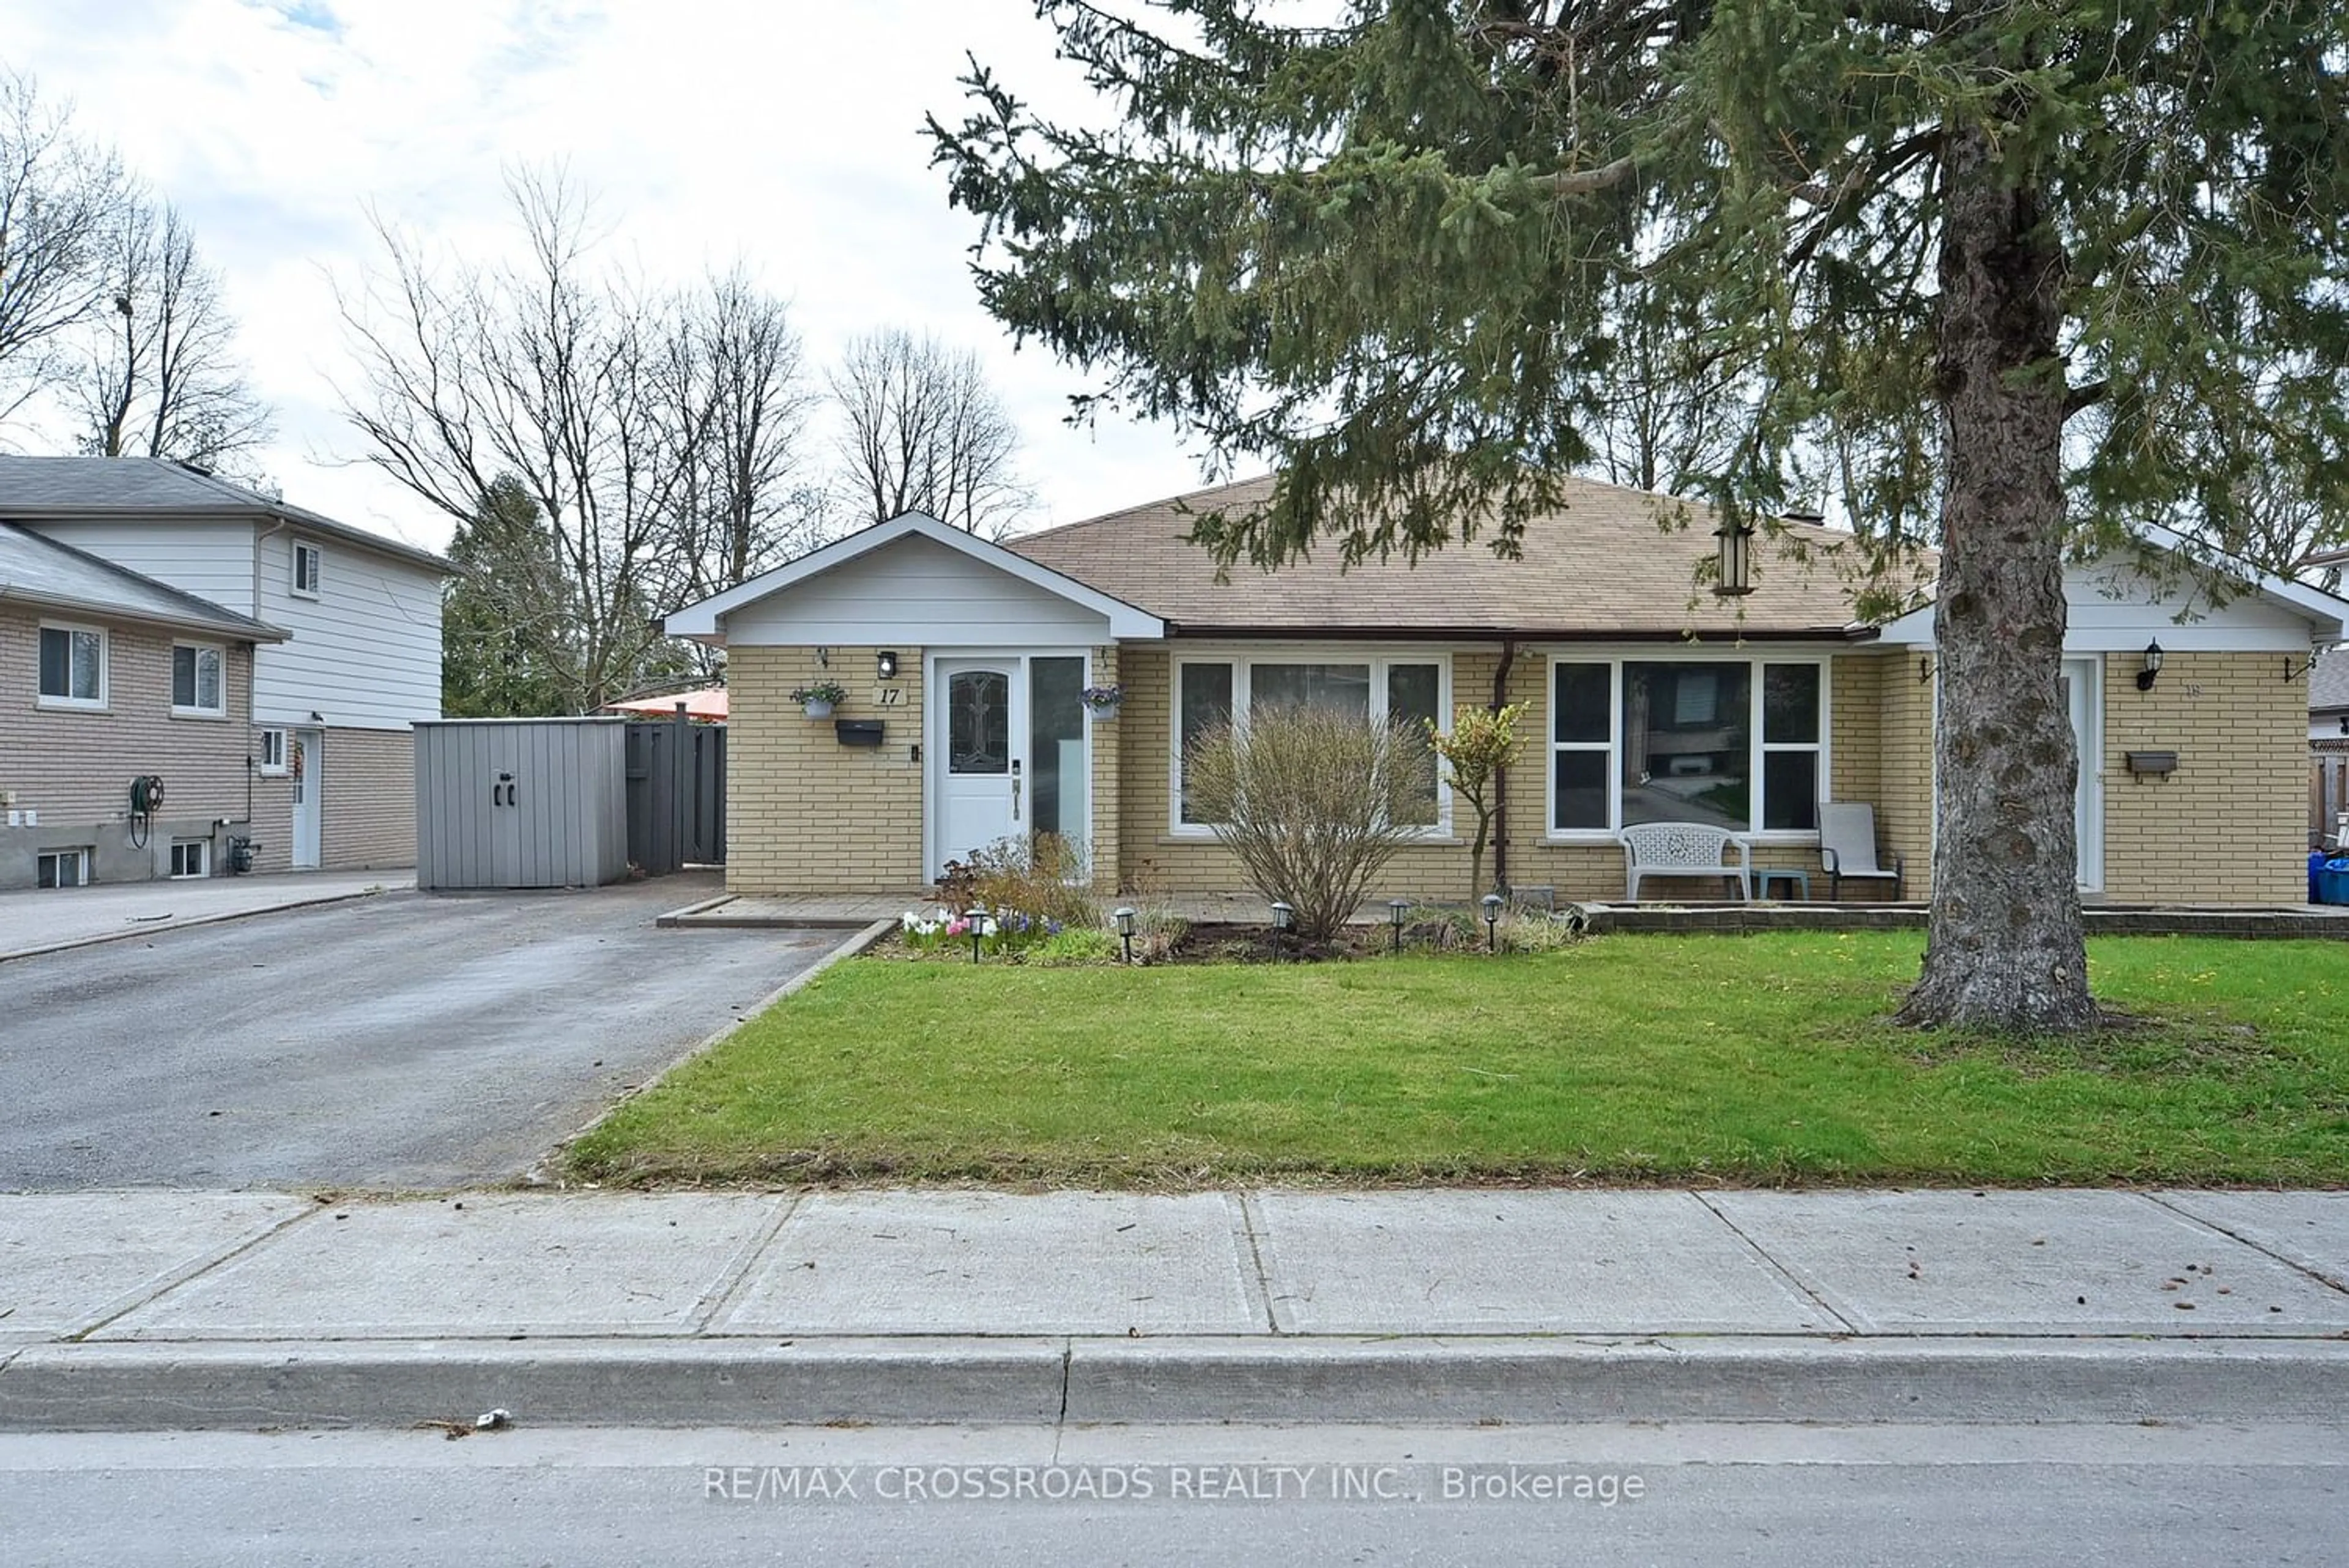 Frontside or backside of a home for 17 Mcdonald Dr, Aurora Ontario L4G 2T4